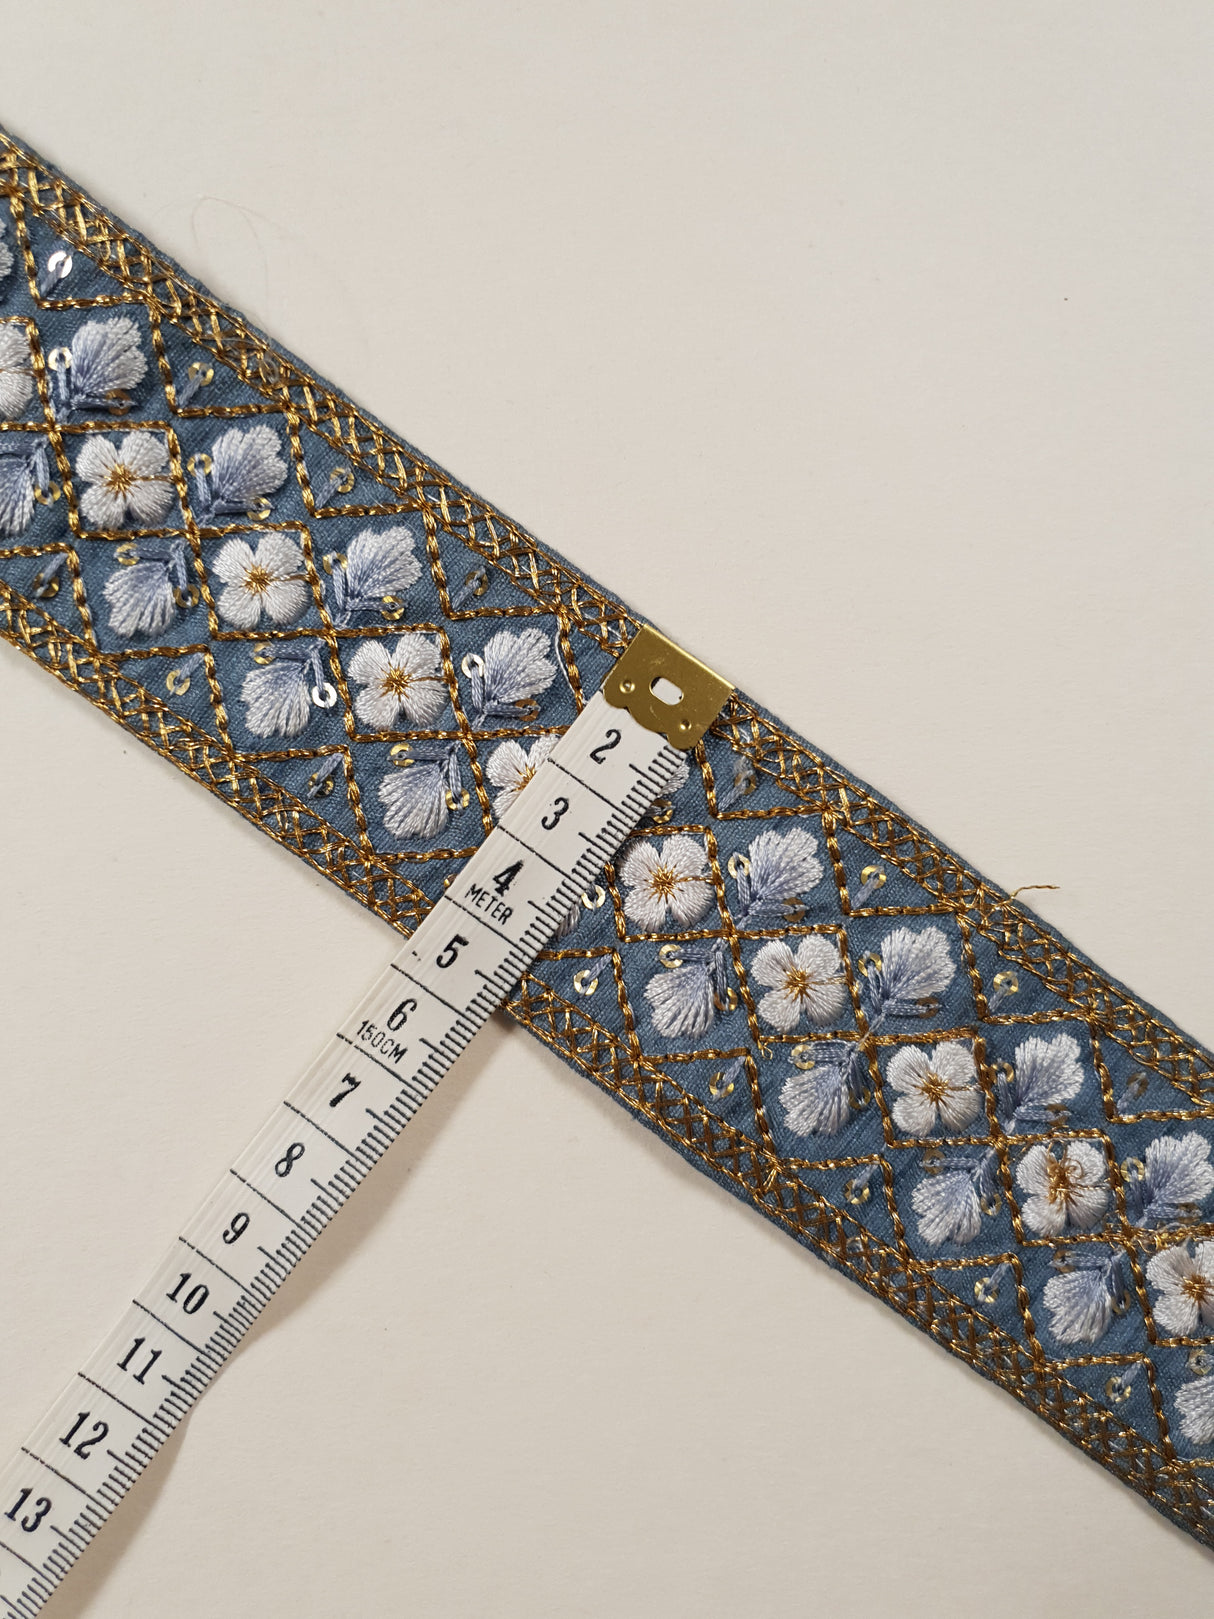 Embroidered Trim - 1 Meter - (ITR-1288)